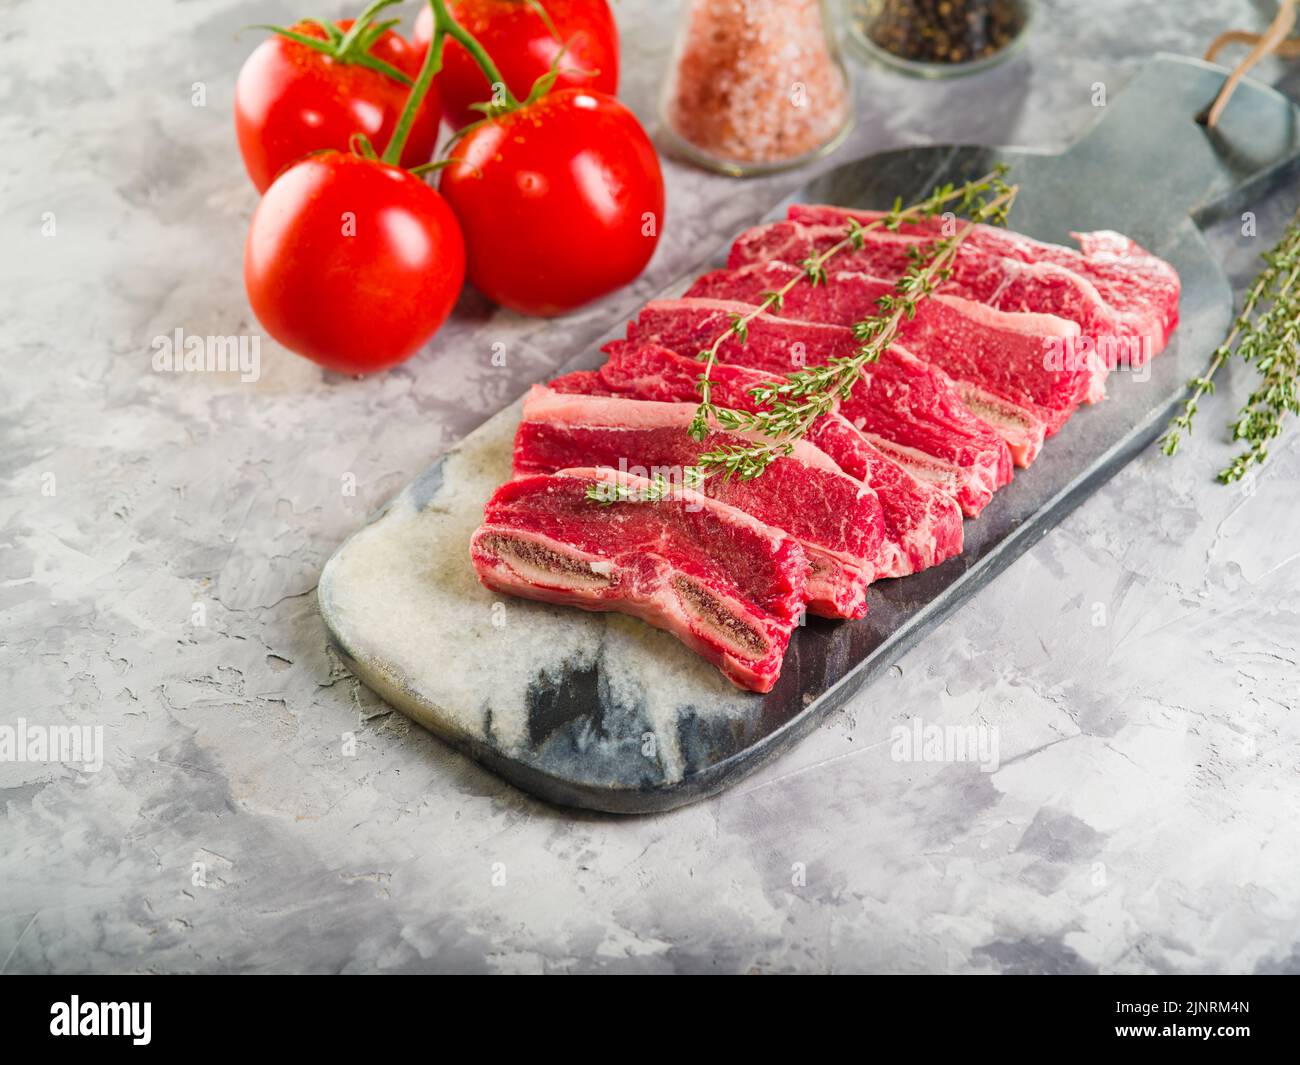 On a light background, fresh meat steaks prepared for cooking, fresh tomatoes, spices, seasonings. Meat recipes. Restaurant and home cooking. Culinary Stock Photo